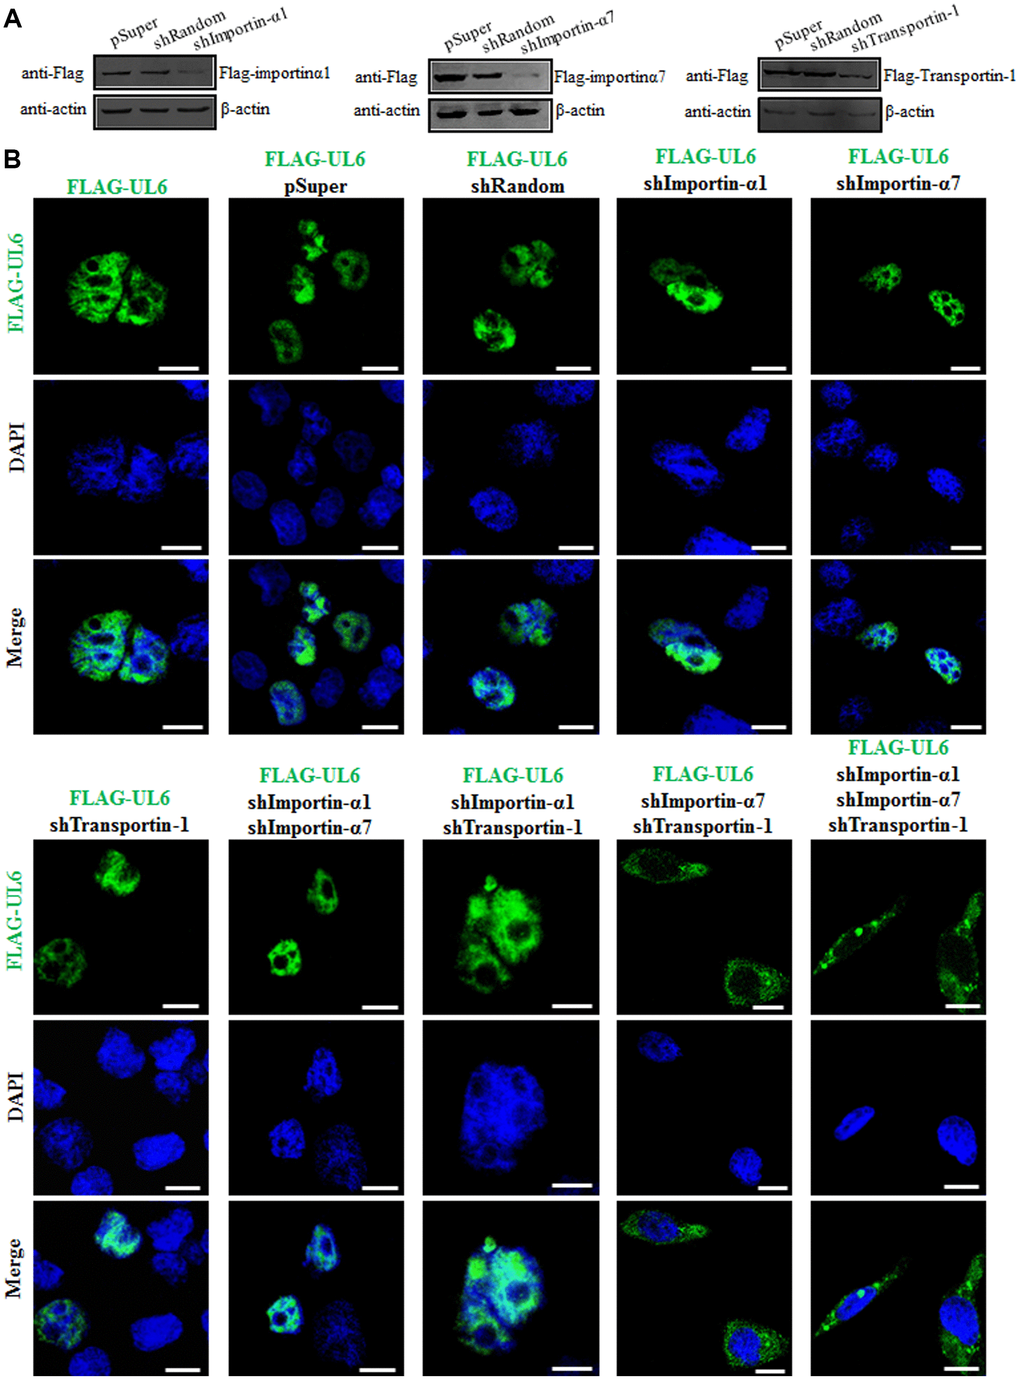 Subcellular distribution of UL6 in presence of different shRNA expression plasmids. (A) Verification of knock down efficiency of the constructed shRNA expression plasmids for importin α1, importin α7 and transportin-1. HEK293T cells were co-transfected with the plasmids combination of Flag-kα2 (importin α1)/pSuper, Flag-kα2/shRandom, Flag-kα2/shImportin-α1, Flag-kα6 (importin α7)/pSuper, Flag-kα6/shRandom, Flag-kα6/shImportin-α7, pFLAG-CMV-transportin-1/pSuper, pFLAG-CMV-transportin-1/shRandom or pFLAG-CMV-transportin-1/shTransportin-1 for 24 h. Then, cells were lysed and IB was performed with anti-Flag mAb. β-actin was used as a loading control. (B) One or two or three plasmids of shImportin-α1, shImportin-α7 and shTransportin-1 were co-transfected with pFLAG-UL6 into COS-7 cells for 24 h, then IFA was carried out using confocal fluorescence microscopy. Statistical analysis of the fluorescence was shown in Table 4.